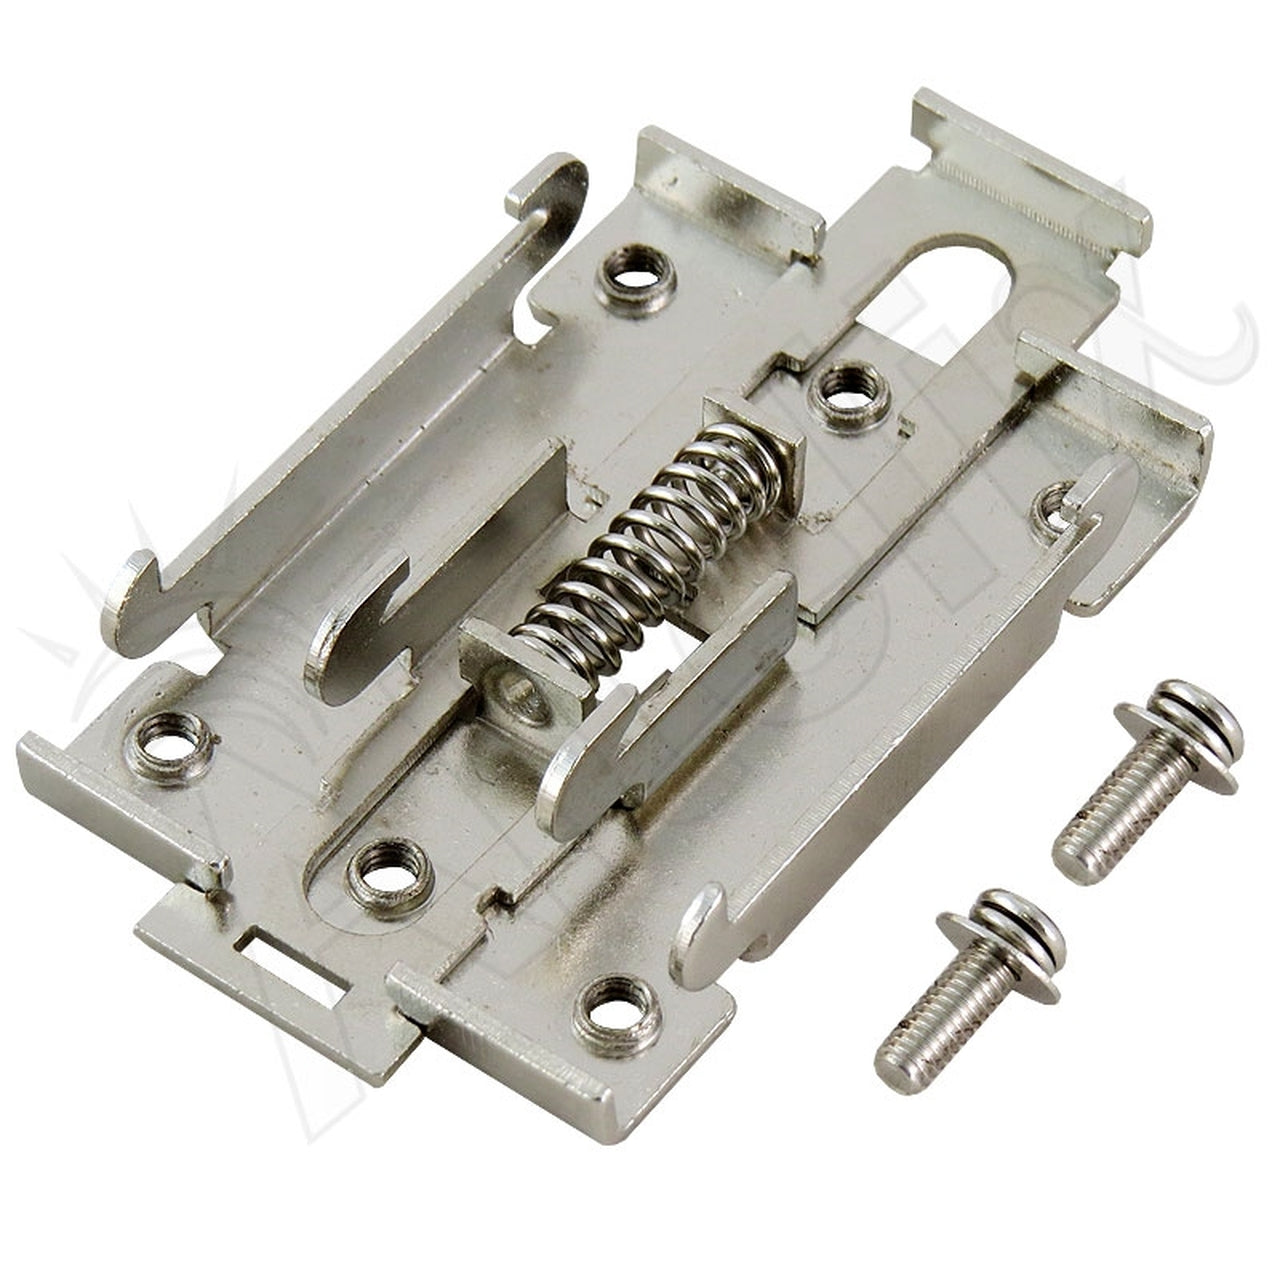 35mm DIN Rail Mounting Clip for SSR Type Relays